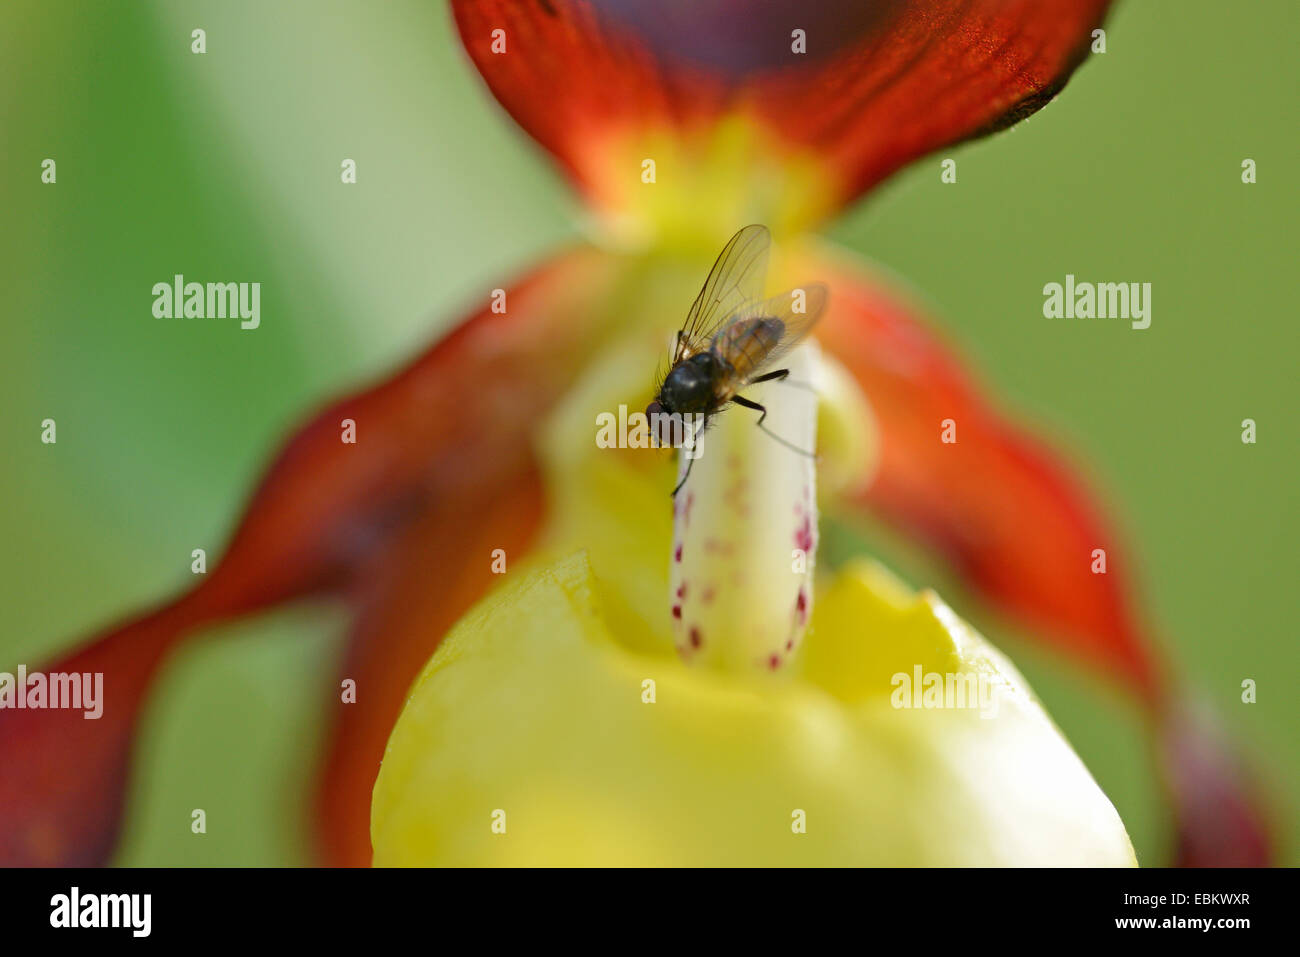 Lady's slipper orchid (Cypripedium calceolus), with fly on satminodium, Germany, Bavaria, Oberpfalz Stock Photo